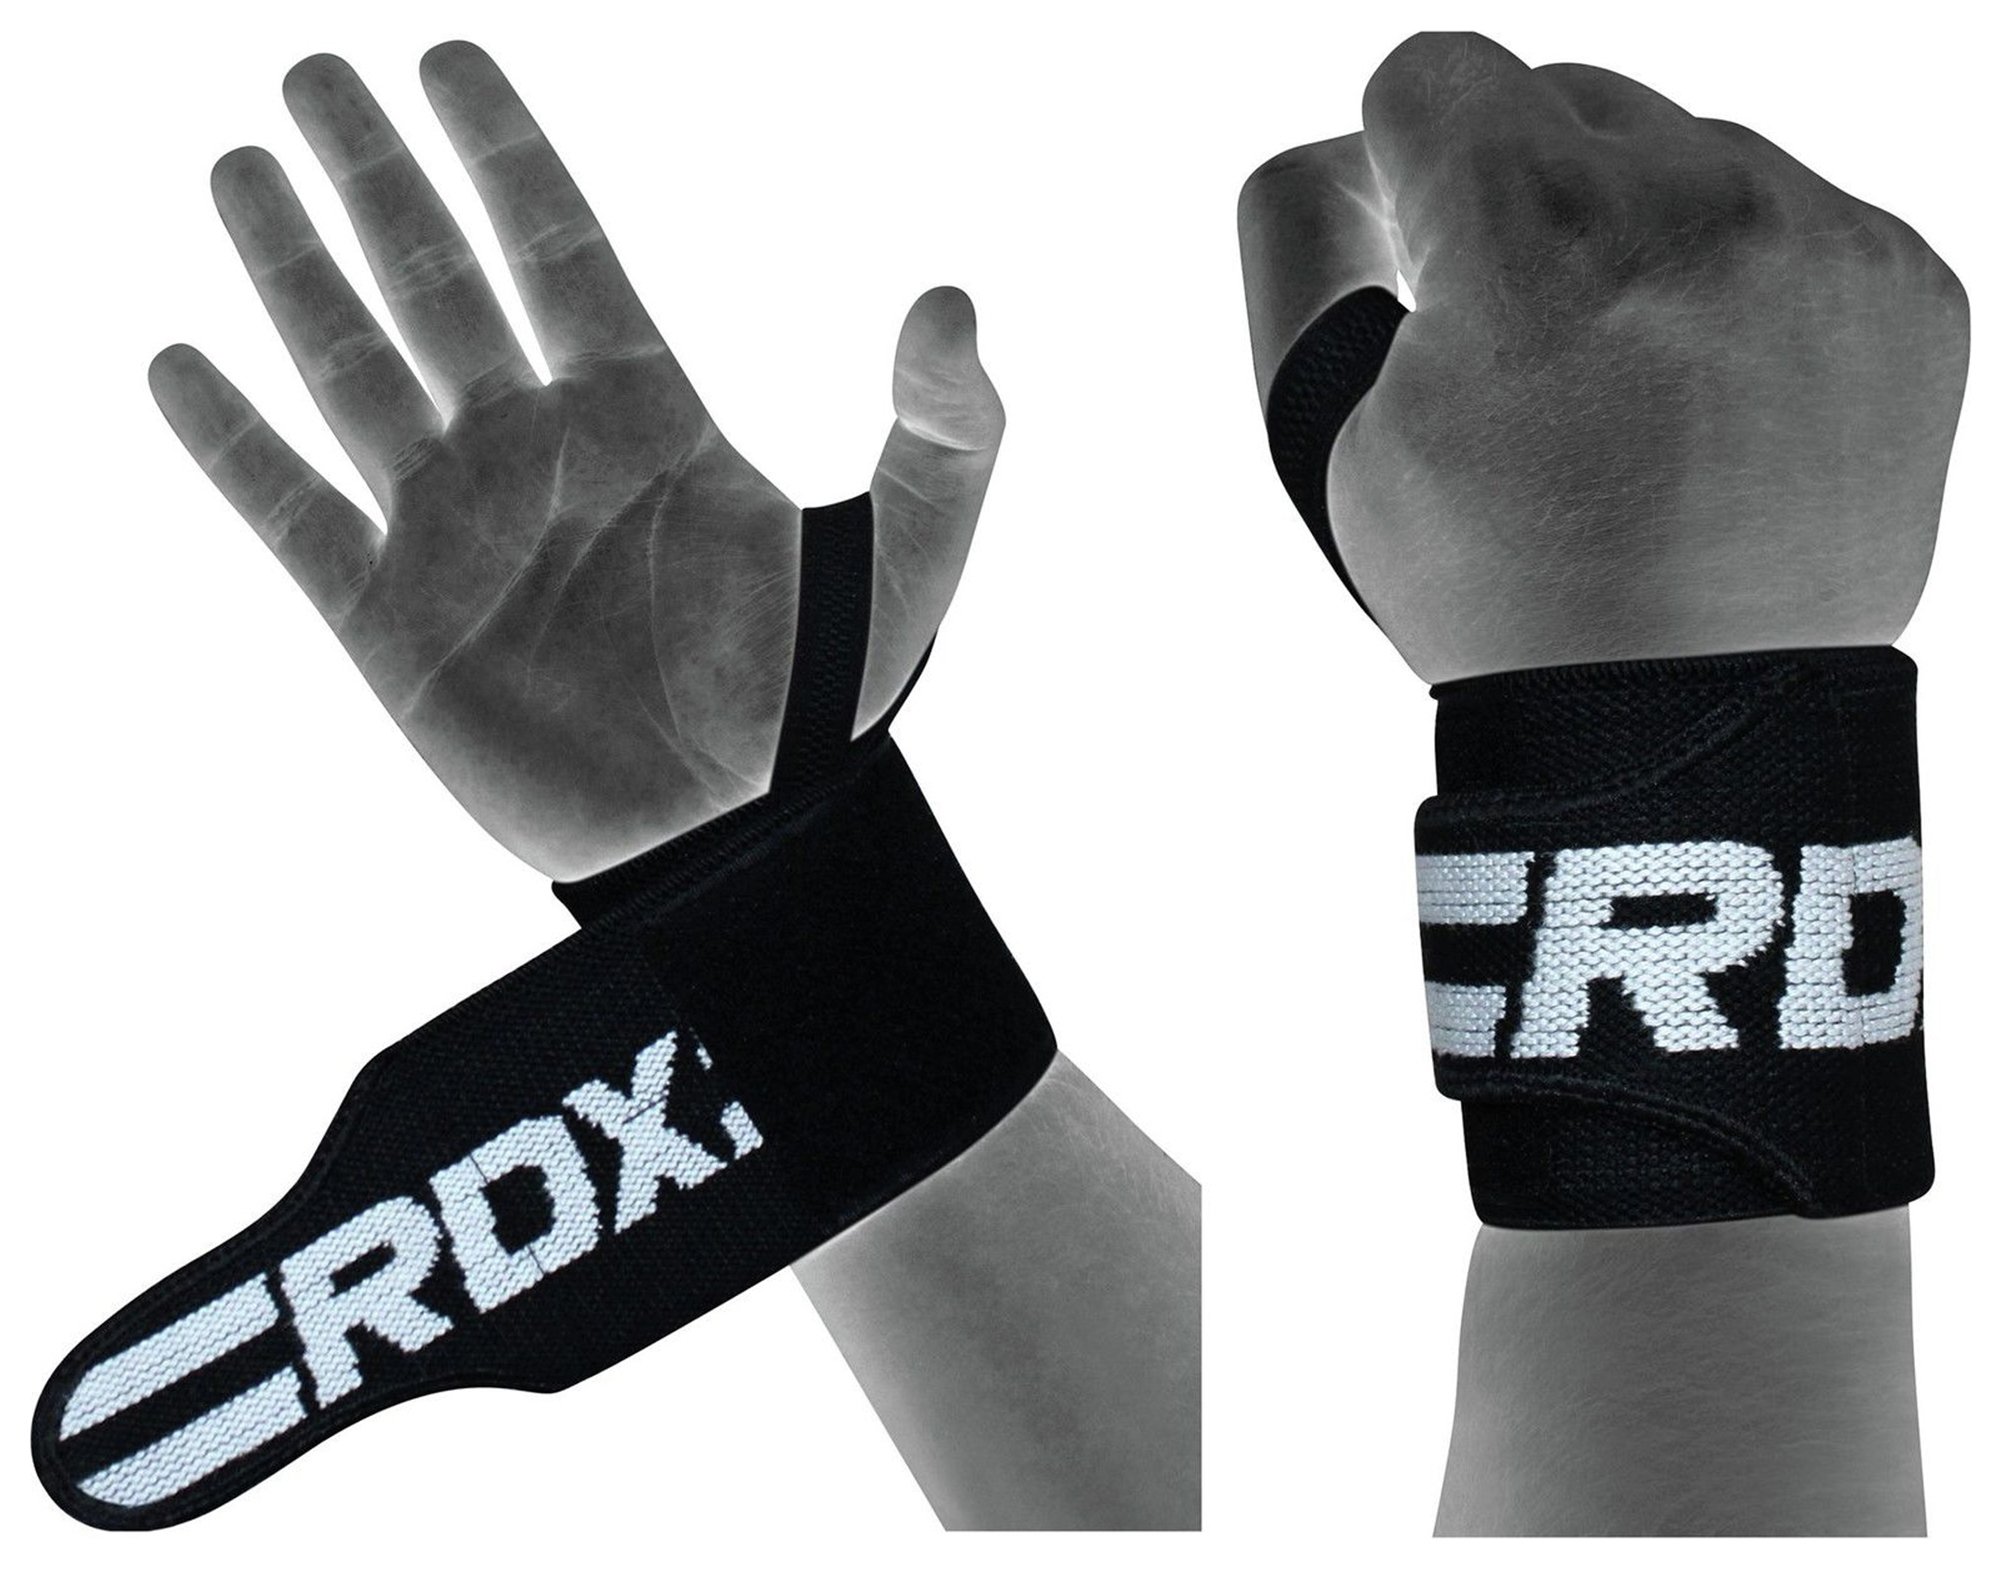 Details about   Wrist Wraps Weight Lifting Training Gym Straps Support Grip Gloves Mark X UK 